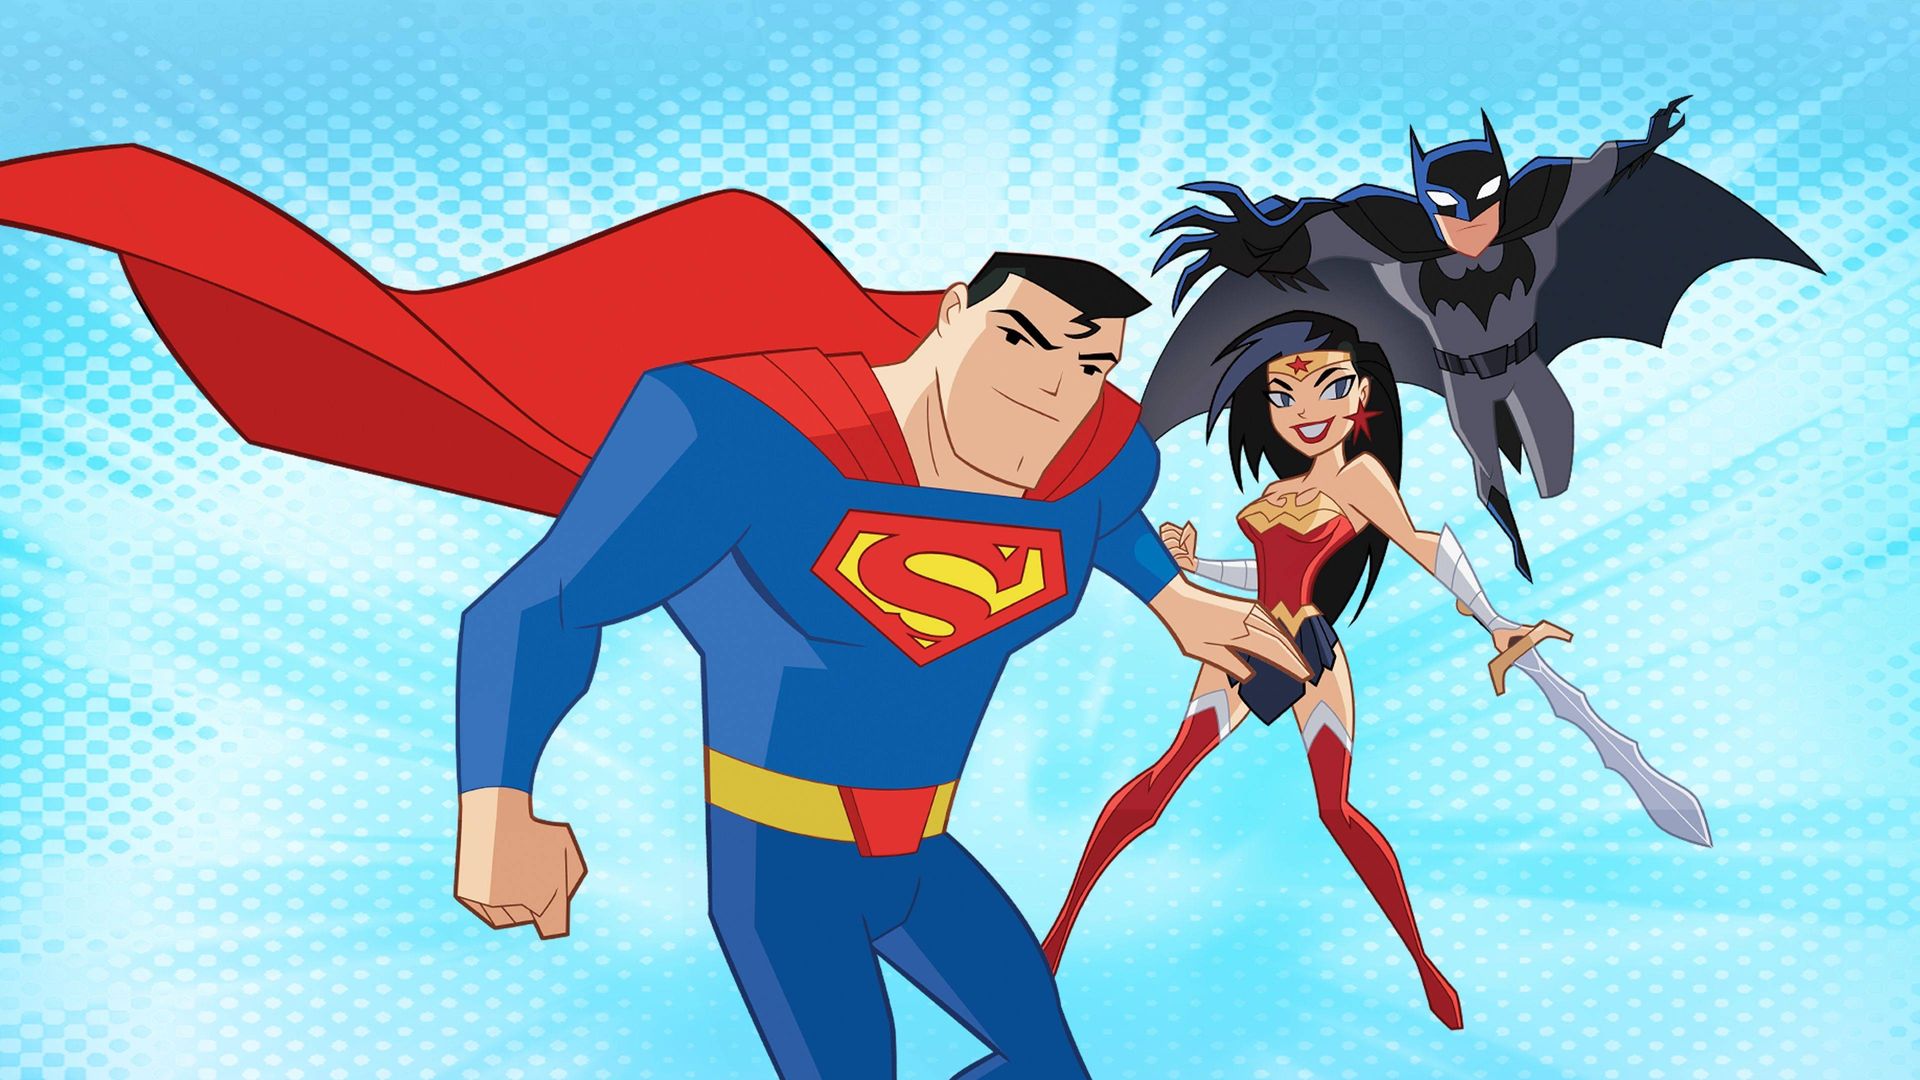 Justice League Action - Watch Episodes on Prime Video, Cartoon Network,  Cartoon Network, DIRECTV STREAM, and Streaming Online | Reelgood